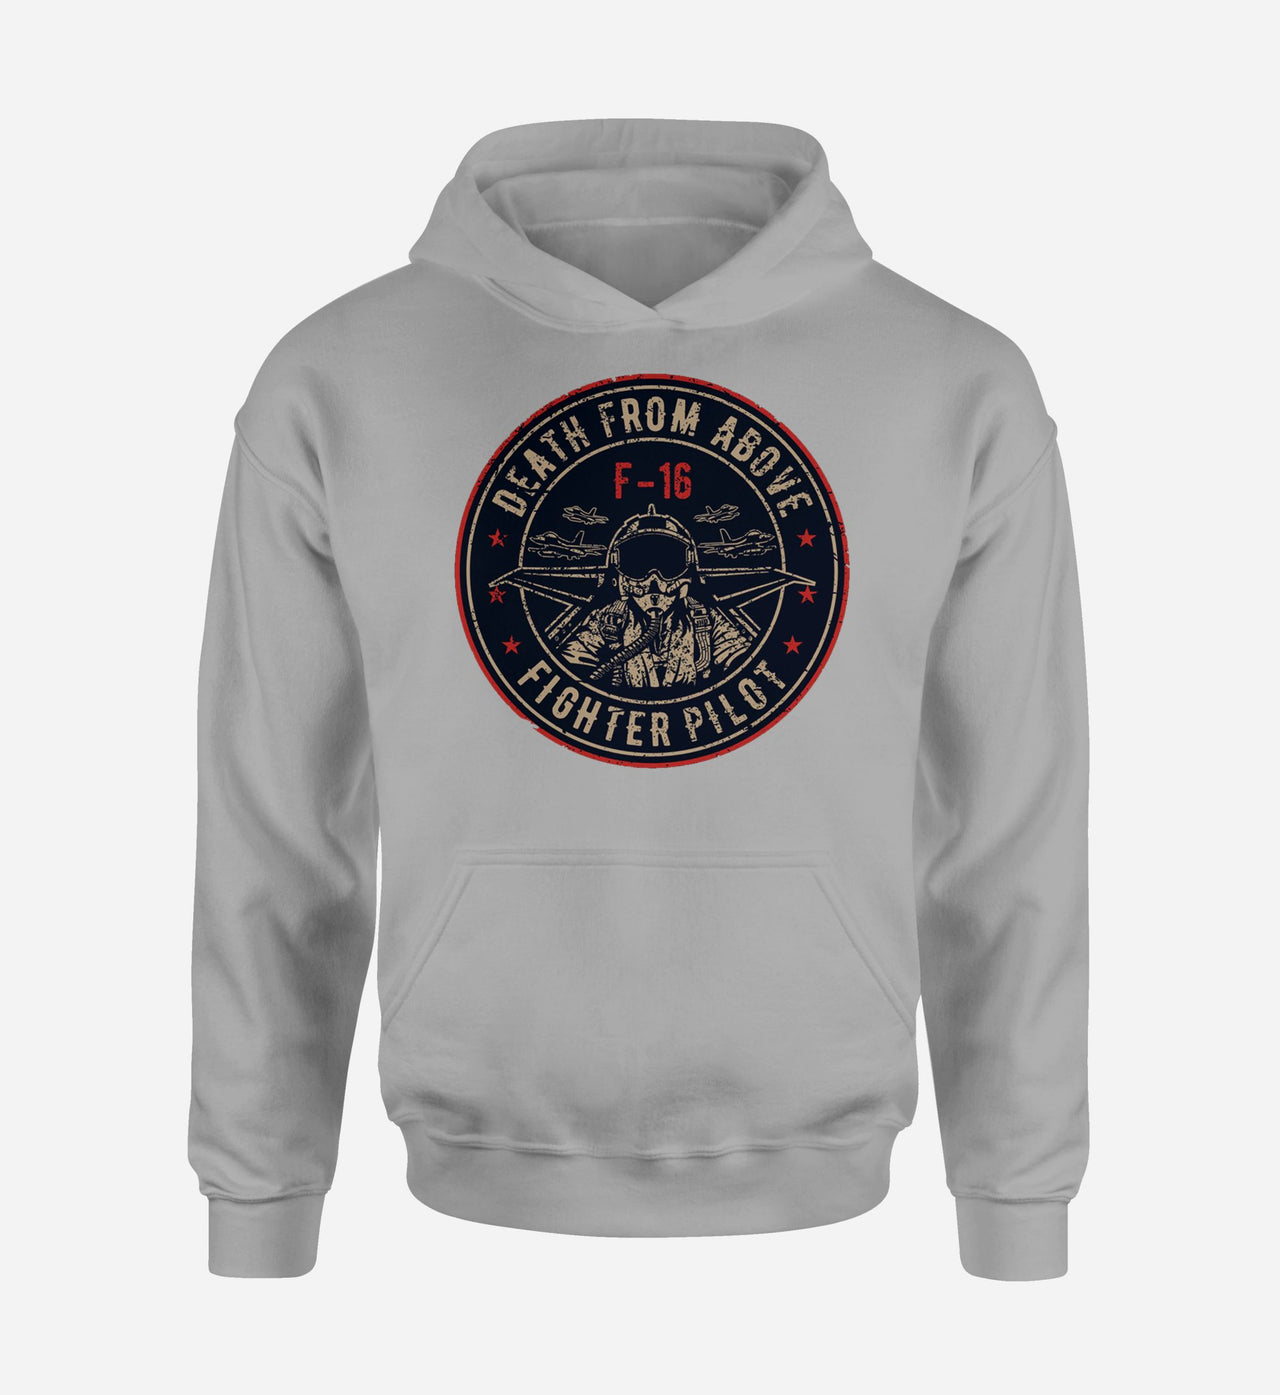 Fighting Falcon F16 - Death From Above Designed Hoodies